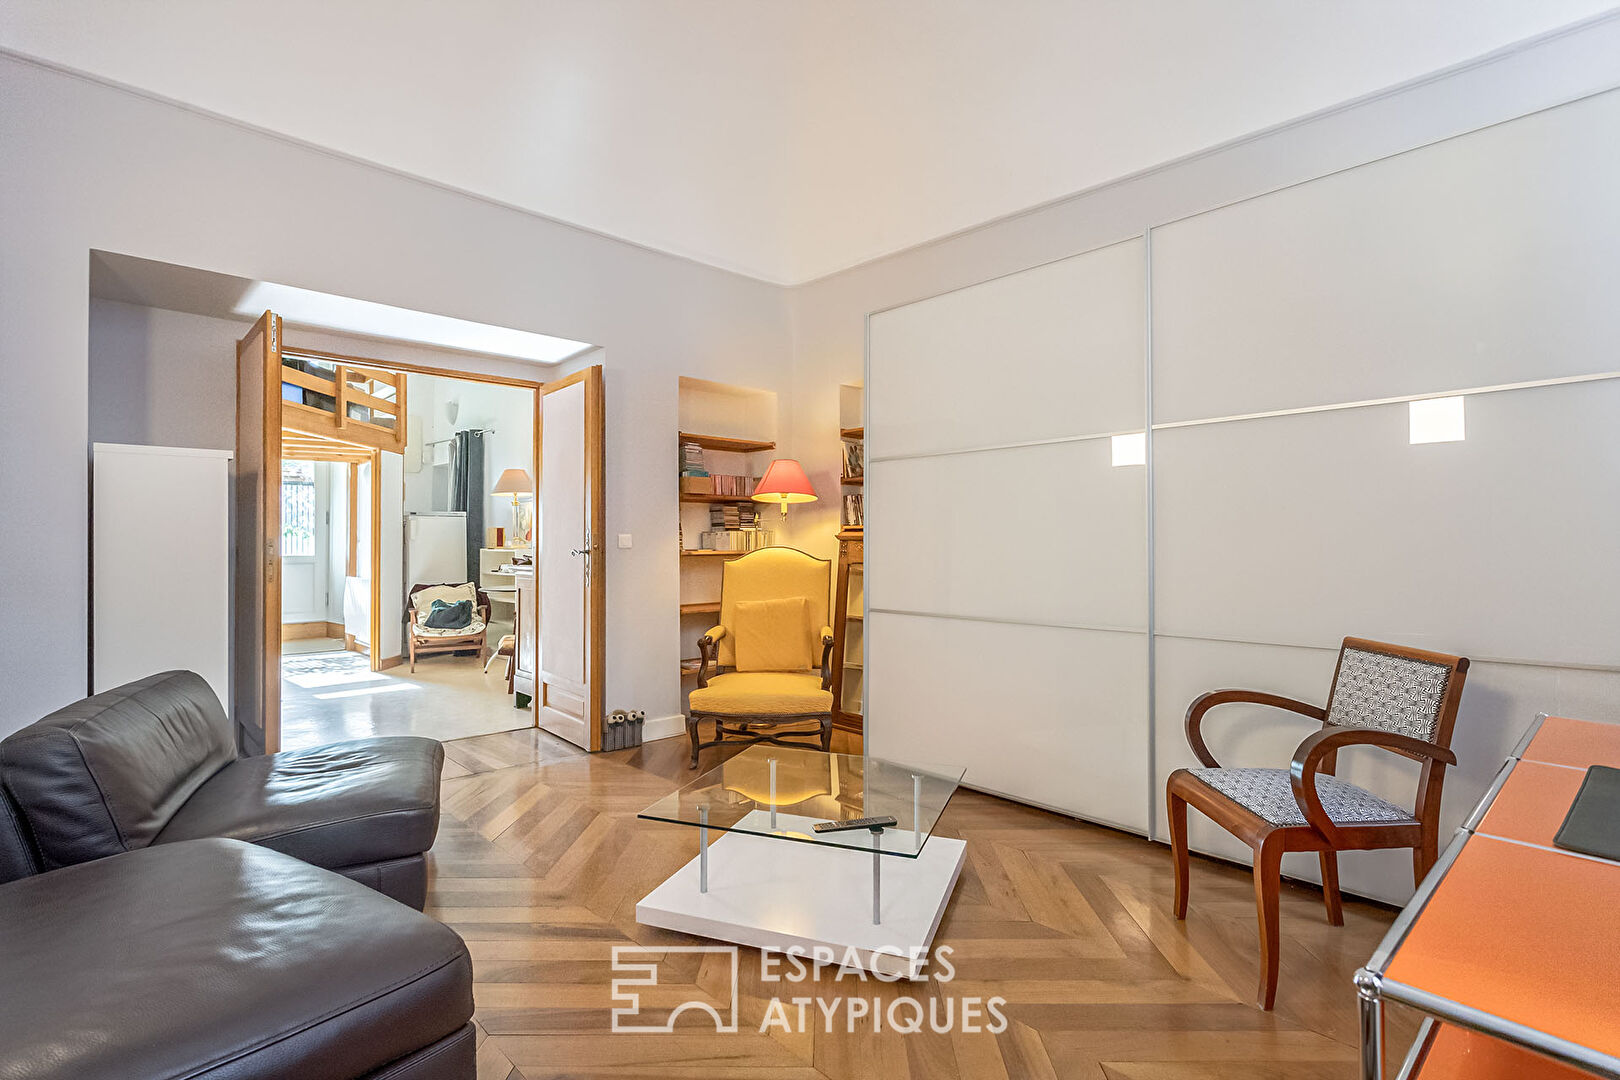 Old renovated apartment in the heart of Chambéry